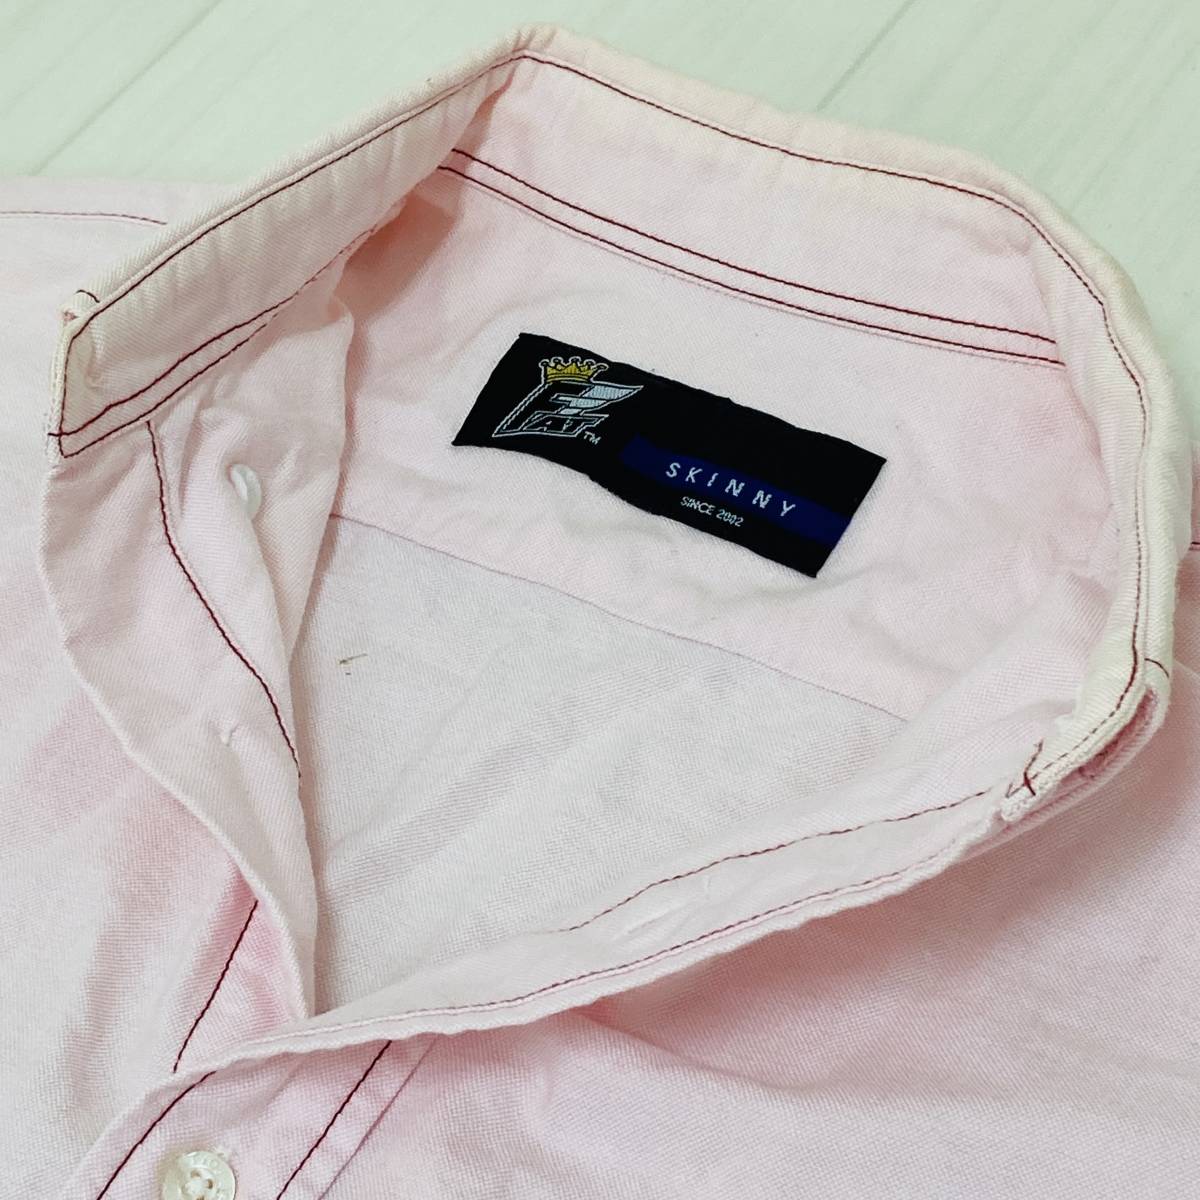 z976 FATefei tea men's long sleeve shirt thin simple Logo embroidery circle collar sizeSKINNY pink stitch all-purpose Basic casual style 